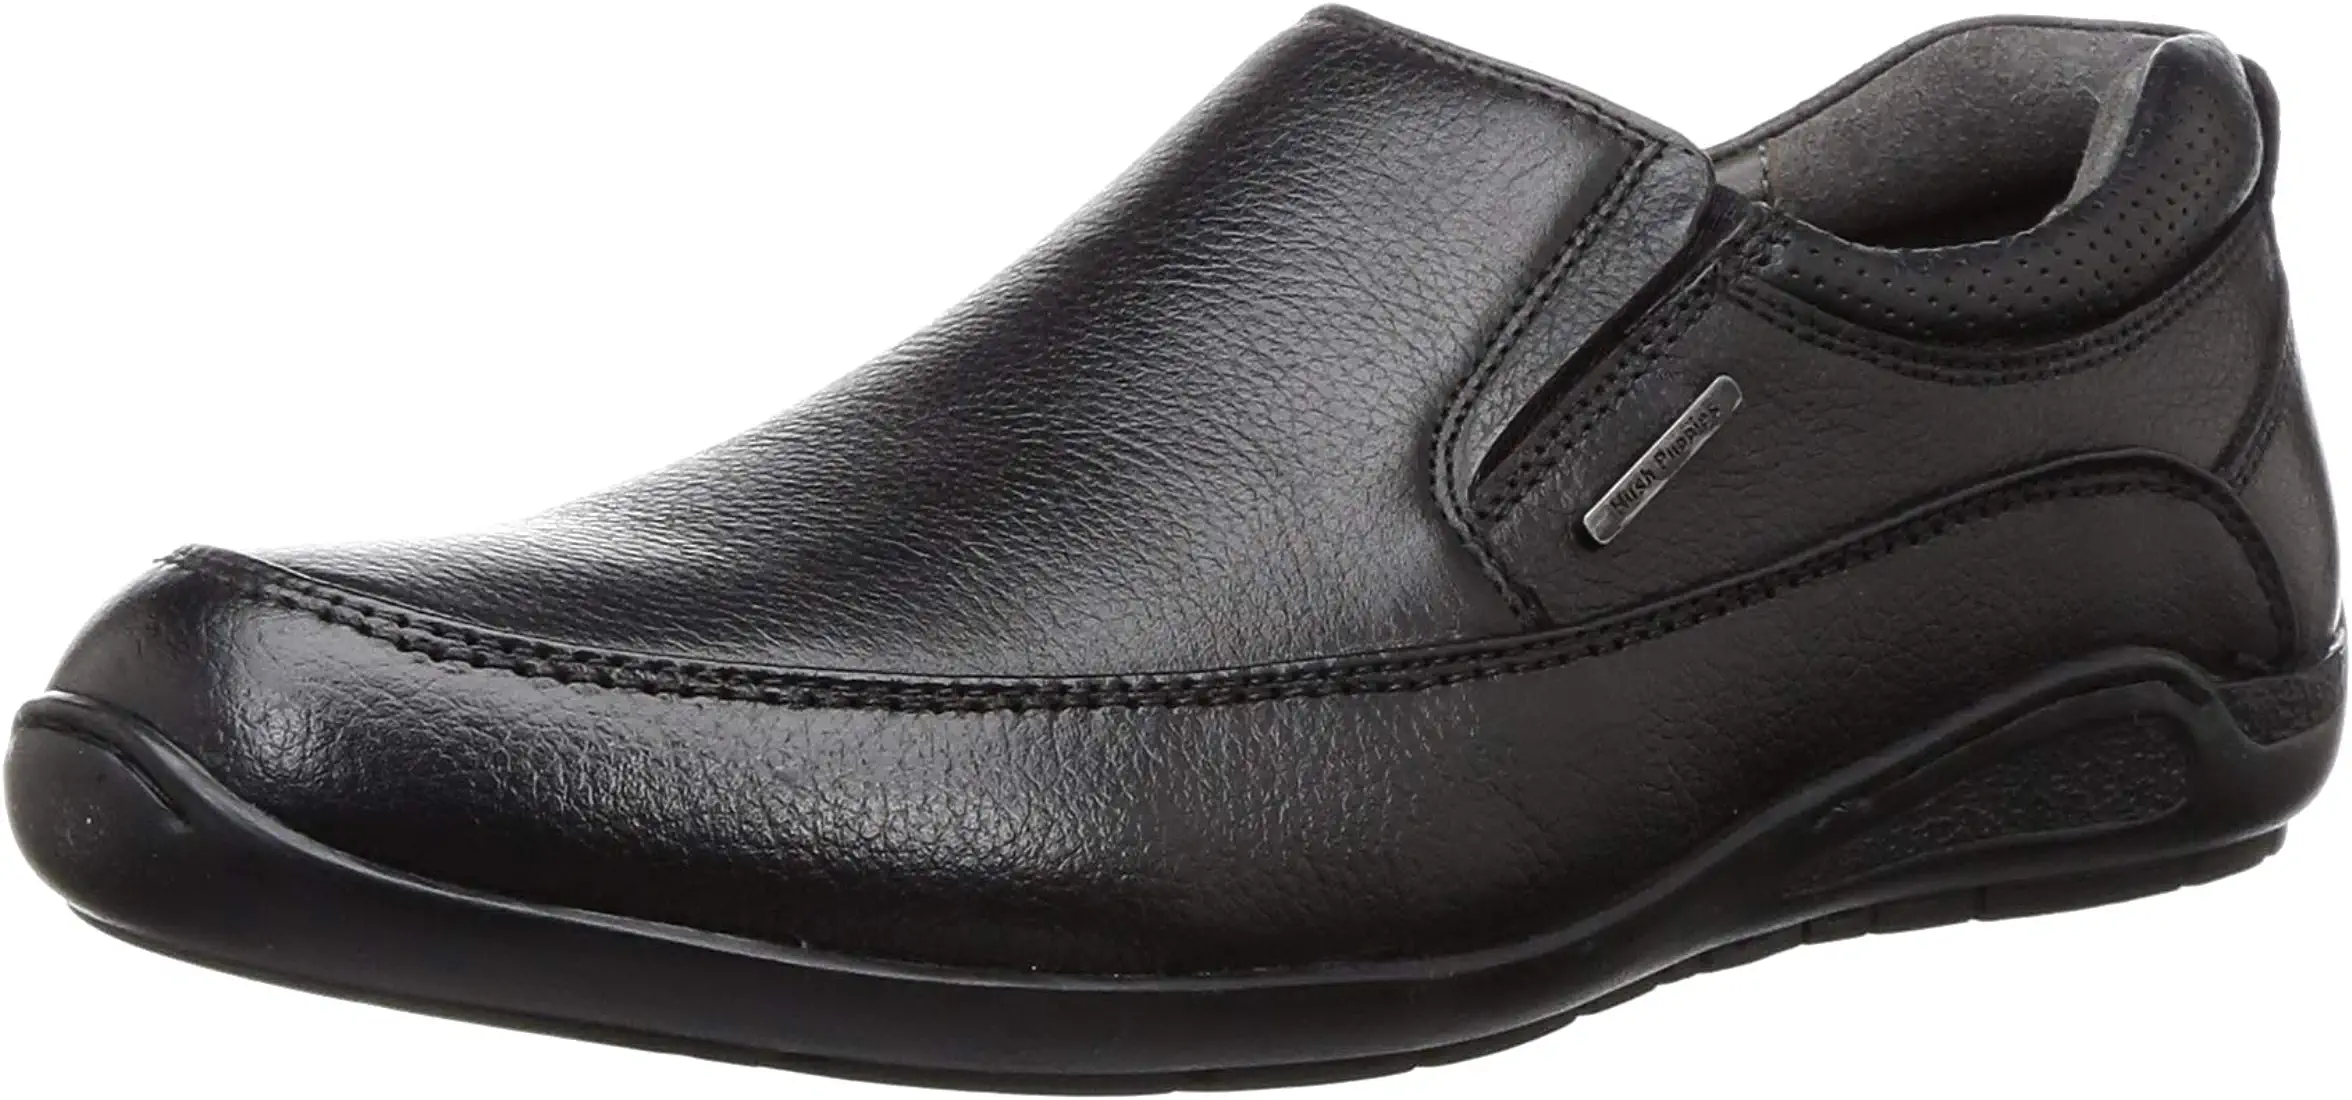 Hush Puppies Mens Adrian Slip on Loafers